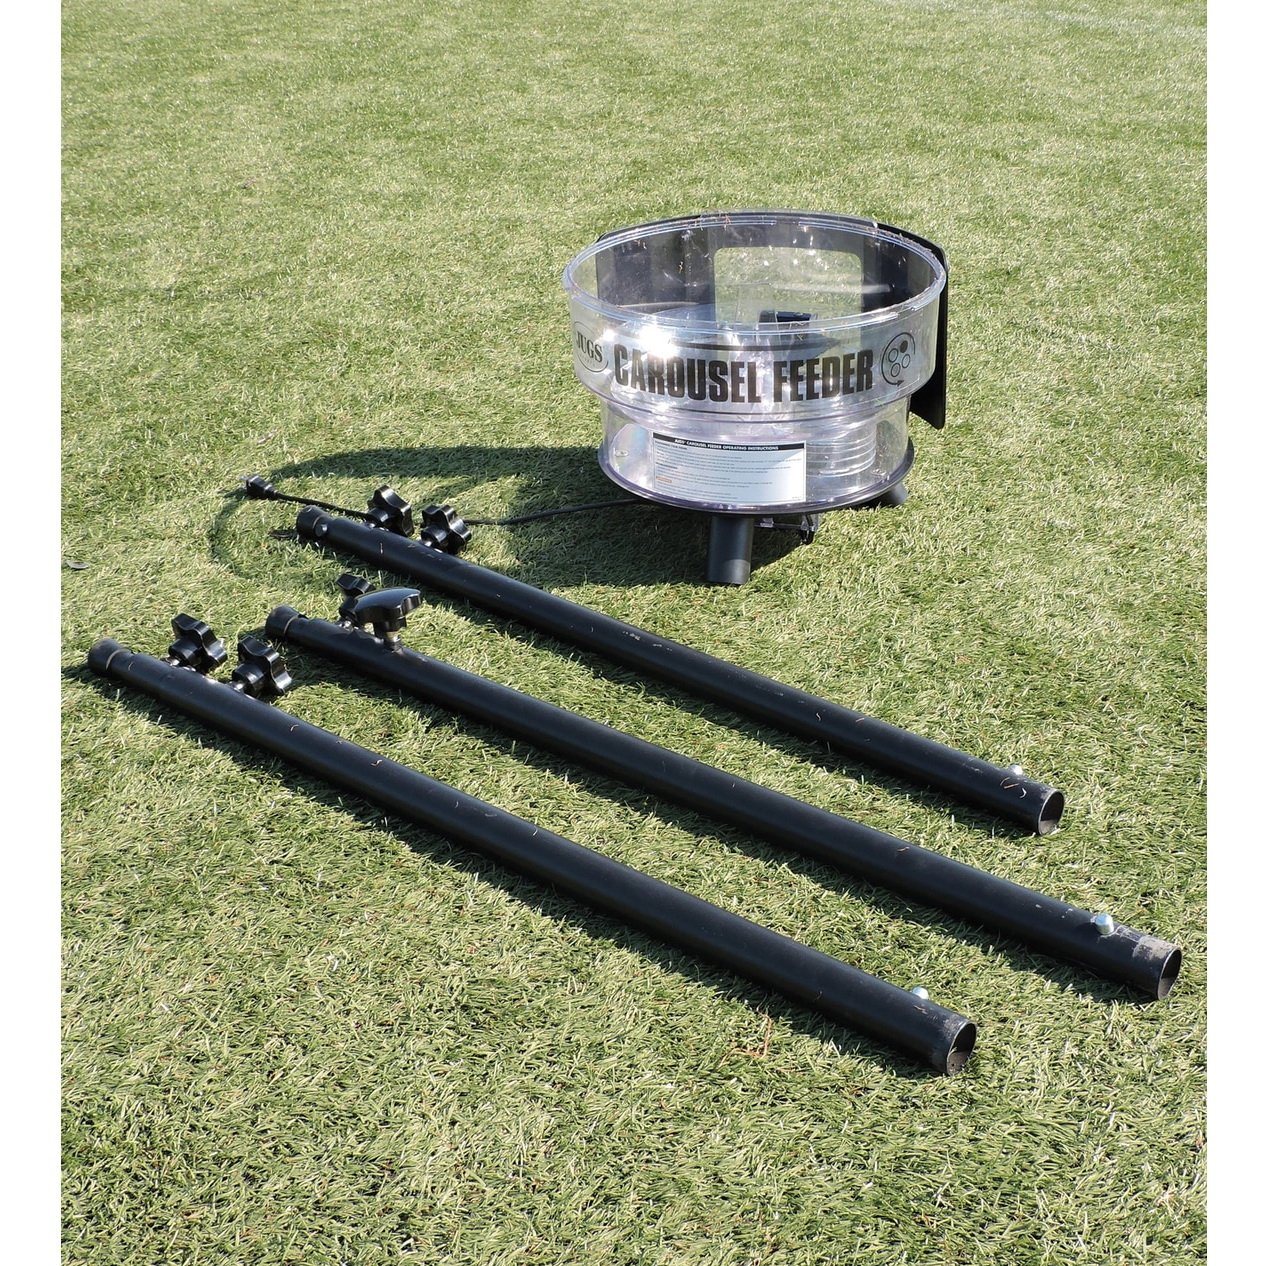 JUGS Carousel Automatic Ball Feeder Disassembled